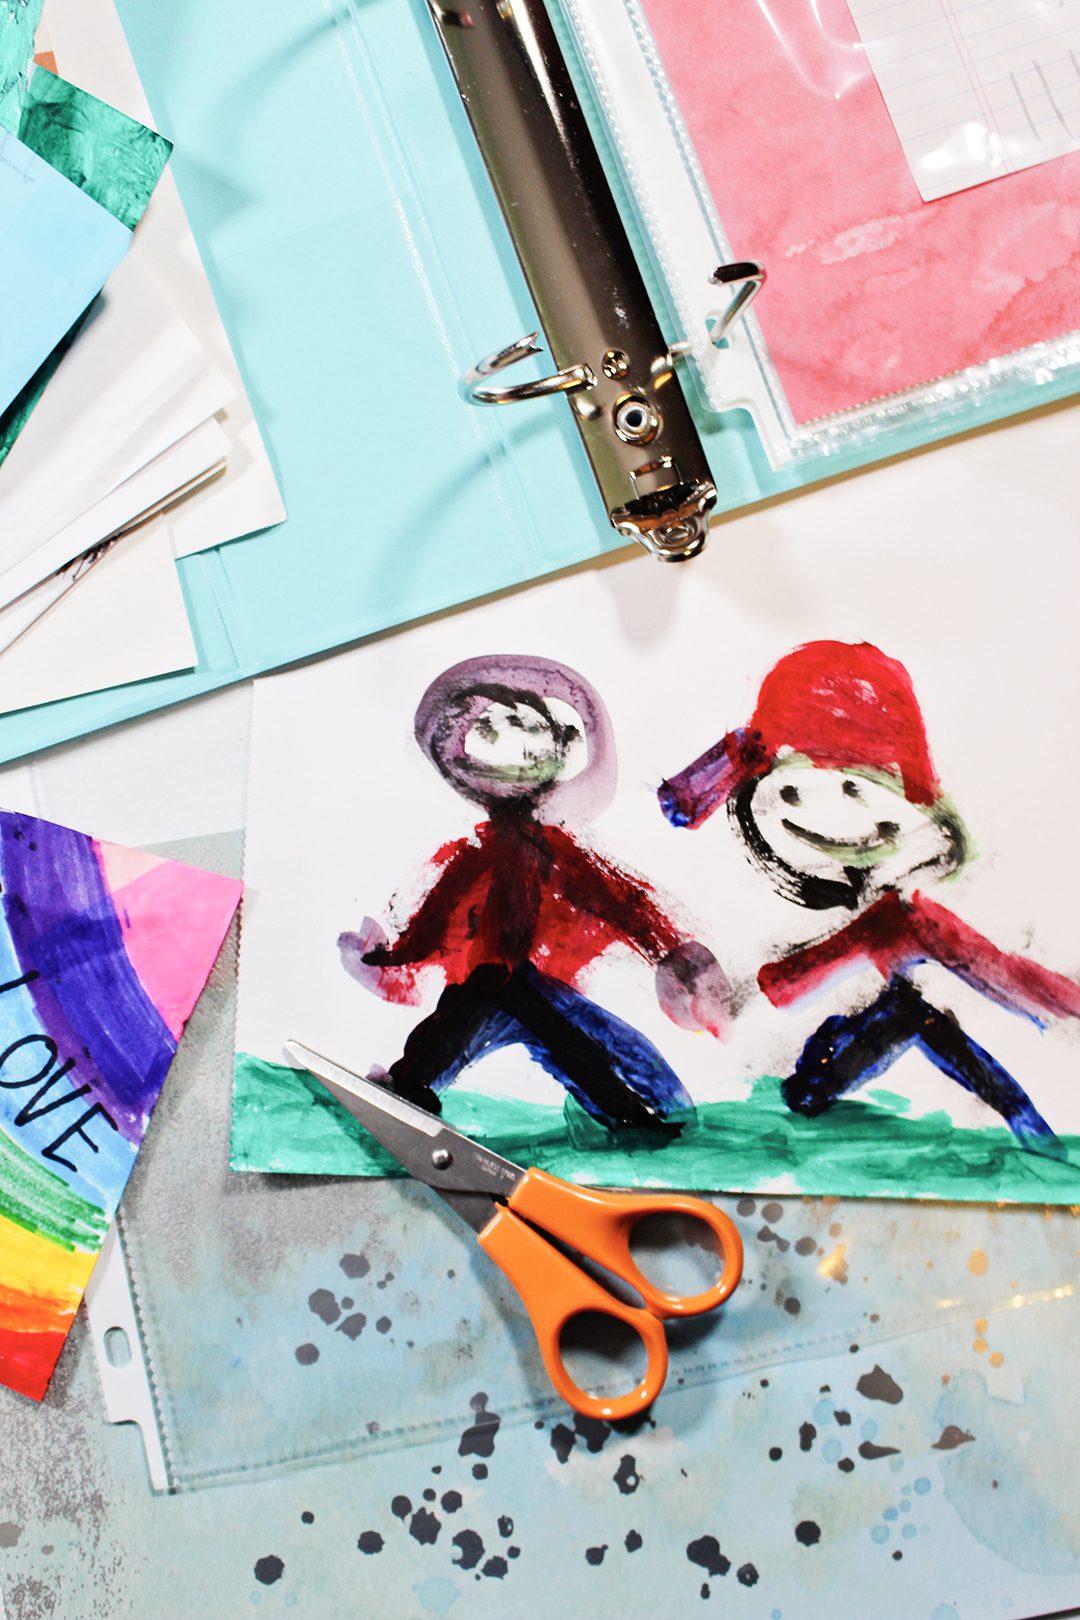 A child's painting of two people holding hands, with scissors, a binder and scrapbook paper nearby.